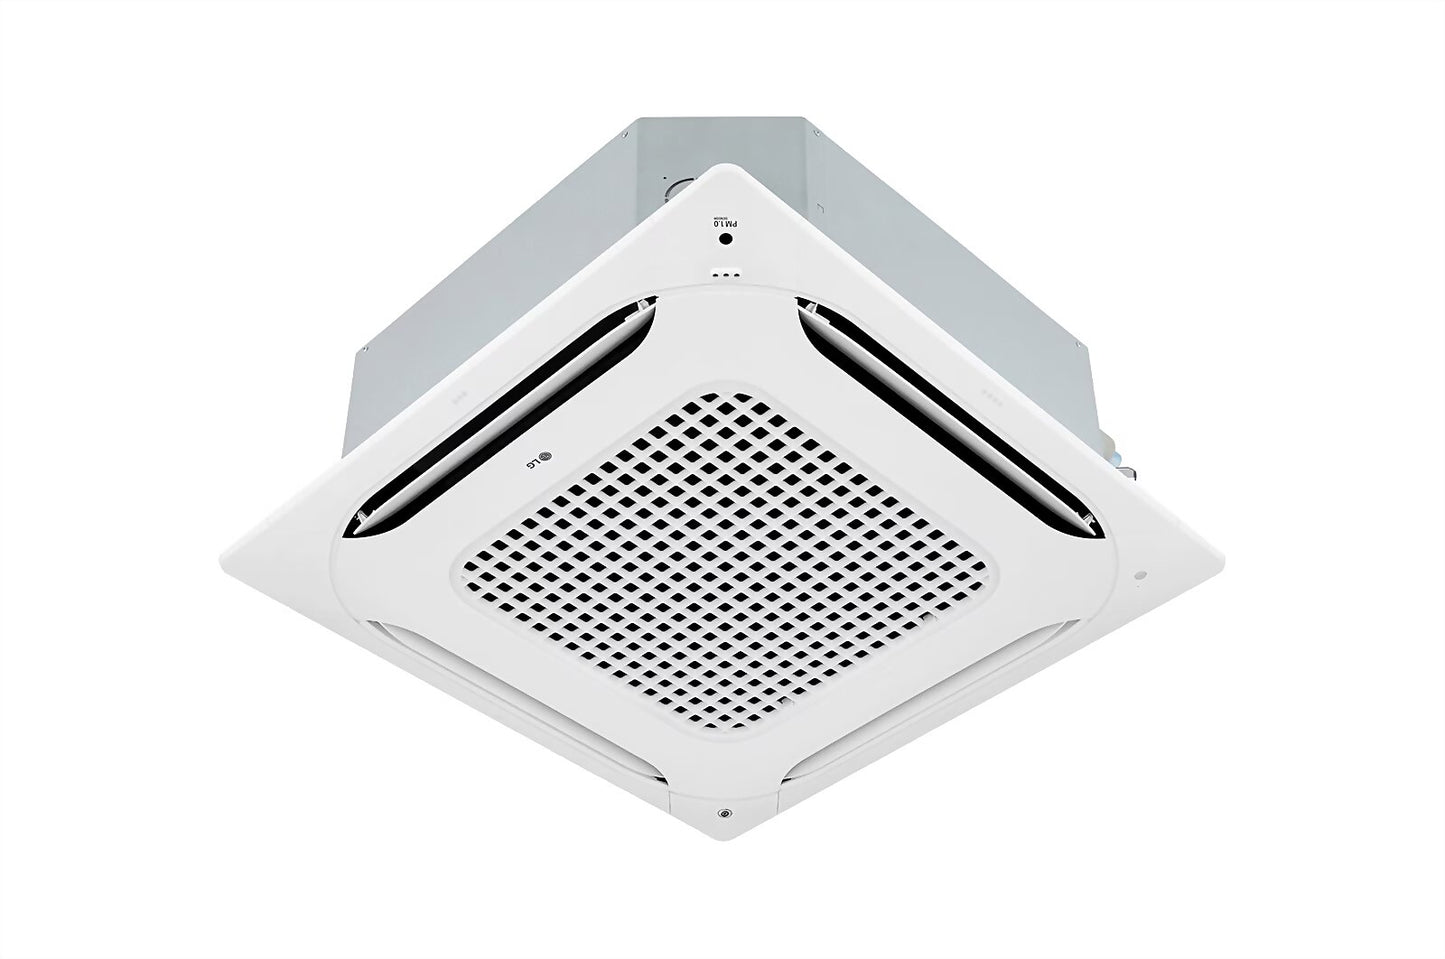 LG Ceiling Mounted 4 Way Cassette Inverter AC 3.6KW with Advanced Air Purification and Independent Vane Control - ARNU12GTRB4